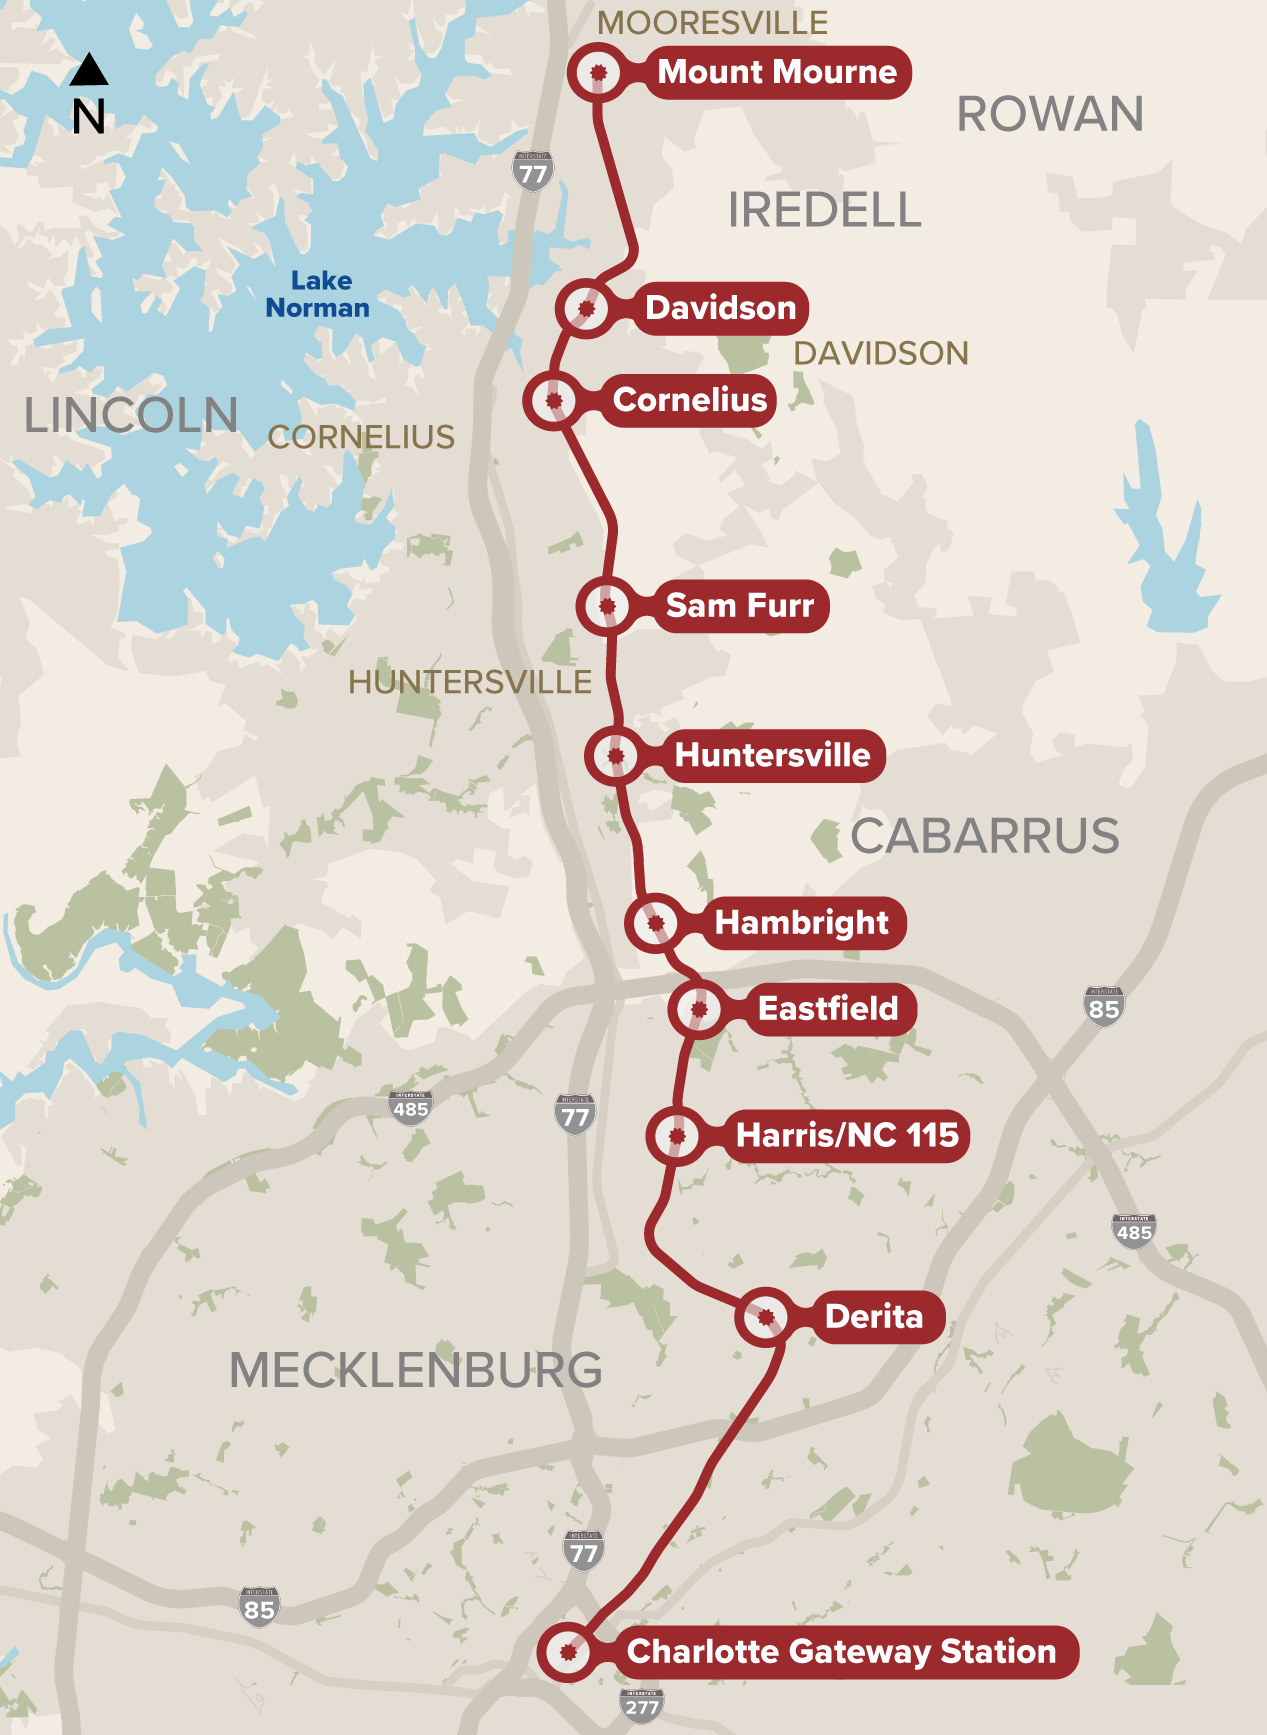 Map of Red Line stops from Charlotte gateway station all the way to Mount mourne